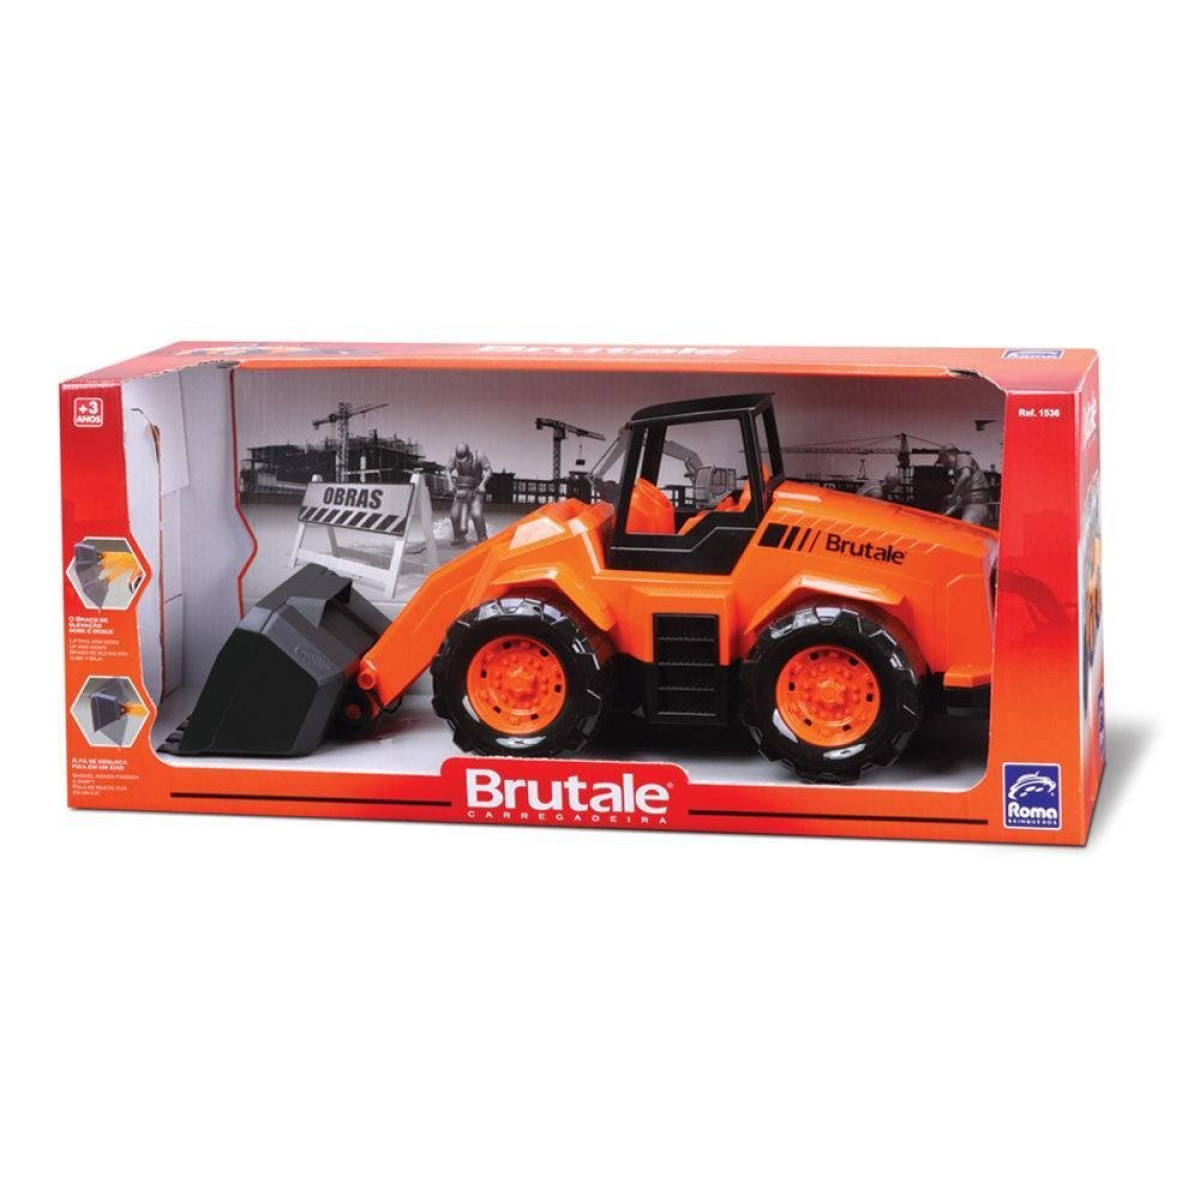 ROMA TRACTOR BRUTALE 1536